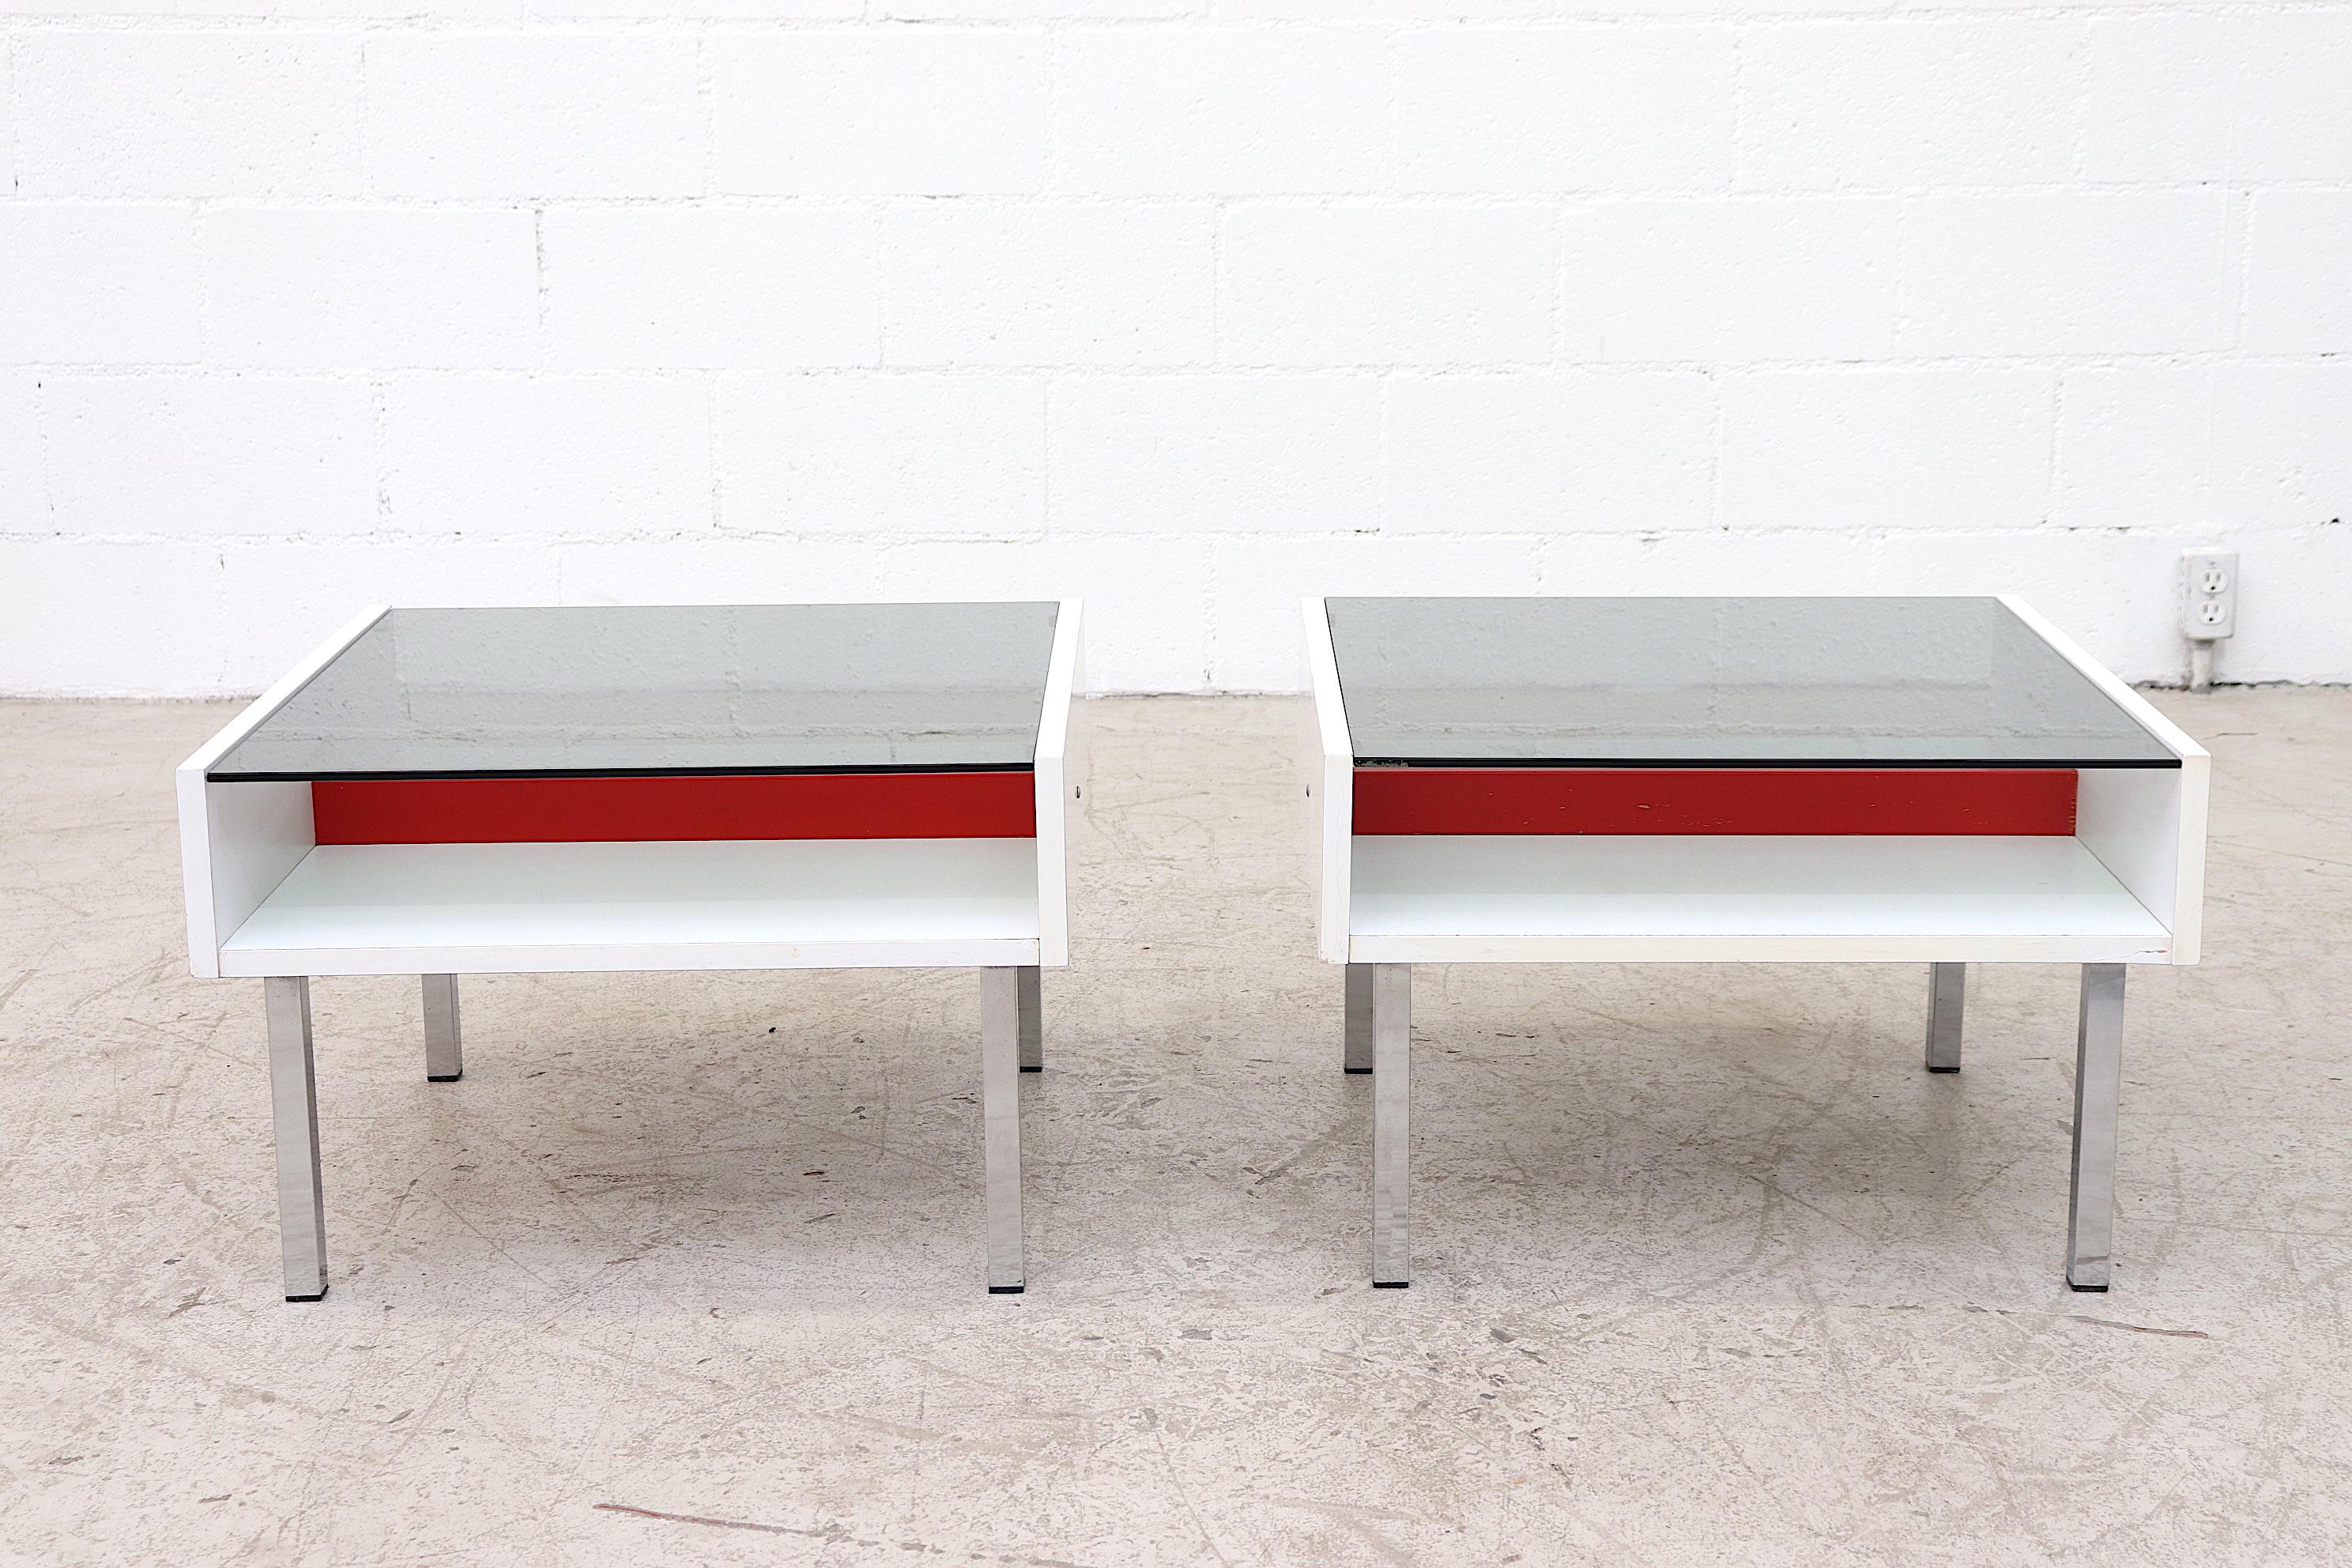 Pair of matching white and red formica coffee or side tables with smoked glass tops and squared chrome legs. In original condition with visible wear consistent with their age and use. Set price.